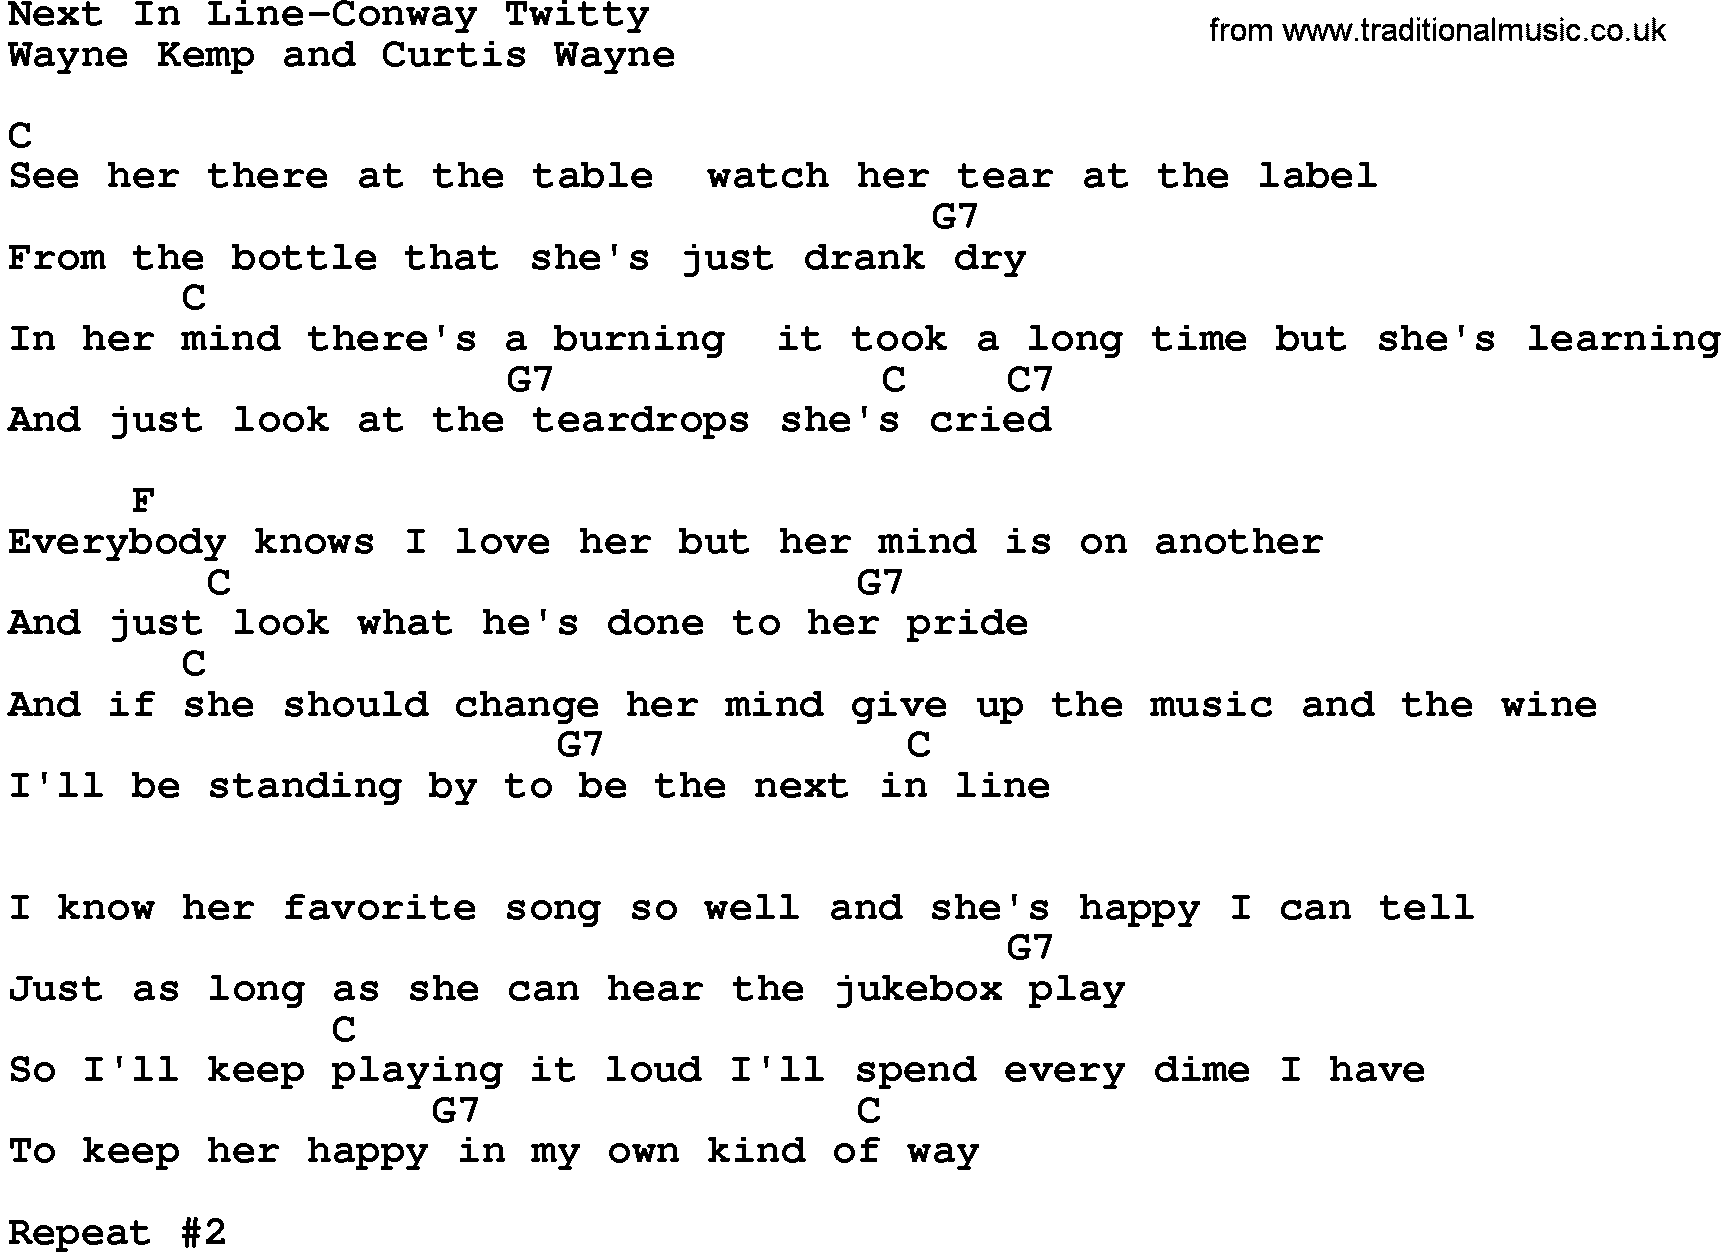 Country music song: Next In Line-Conway Twitty lyrics and chords